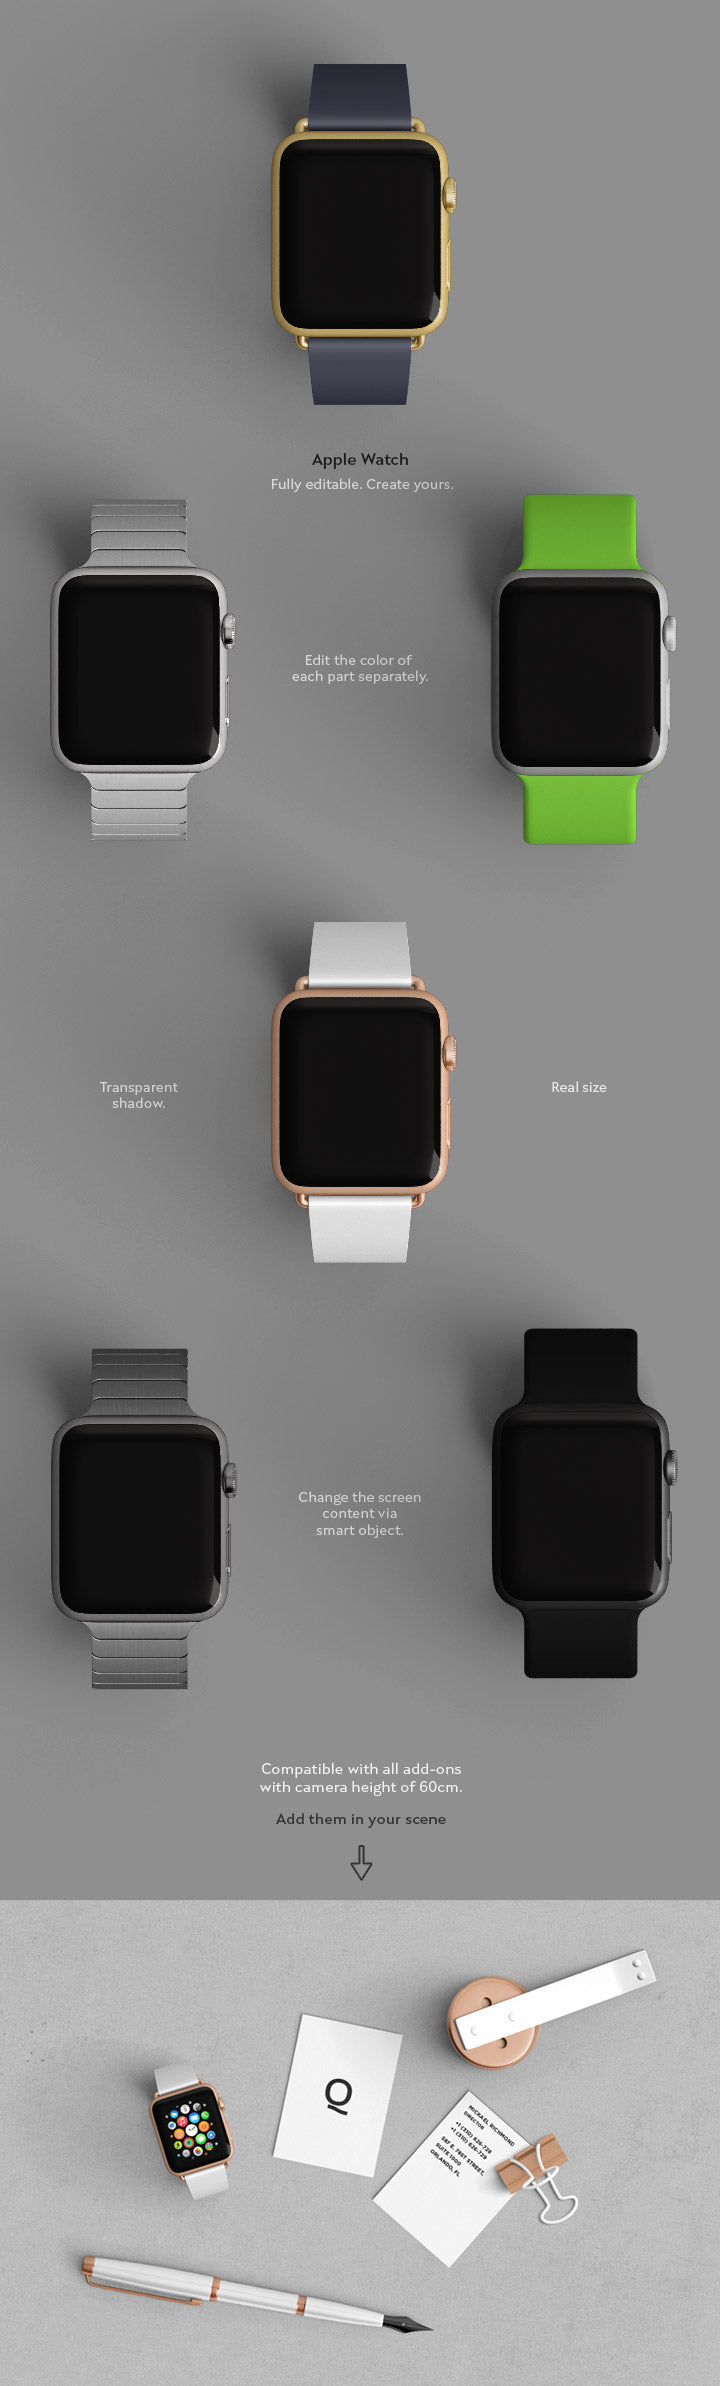 Free Smartwatch Mockup with Changeable Color (Apple Watch)